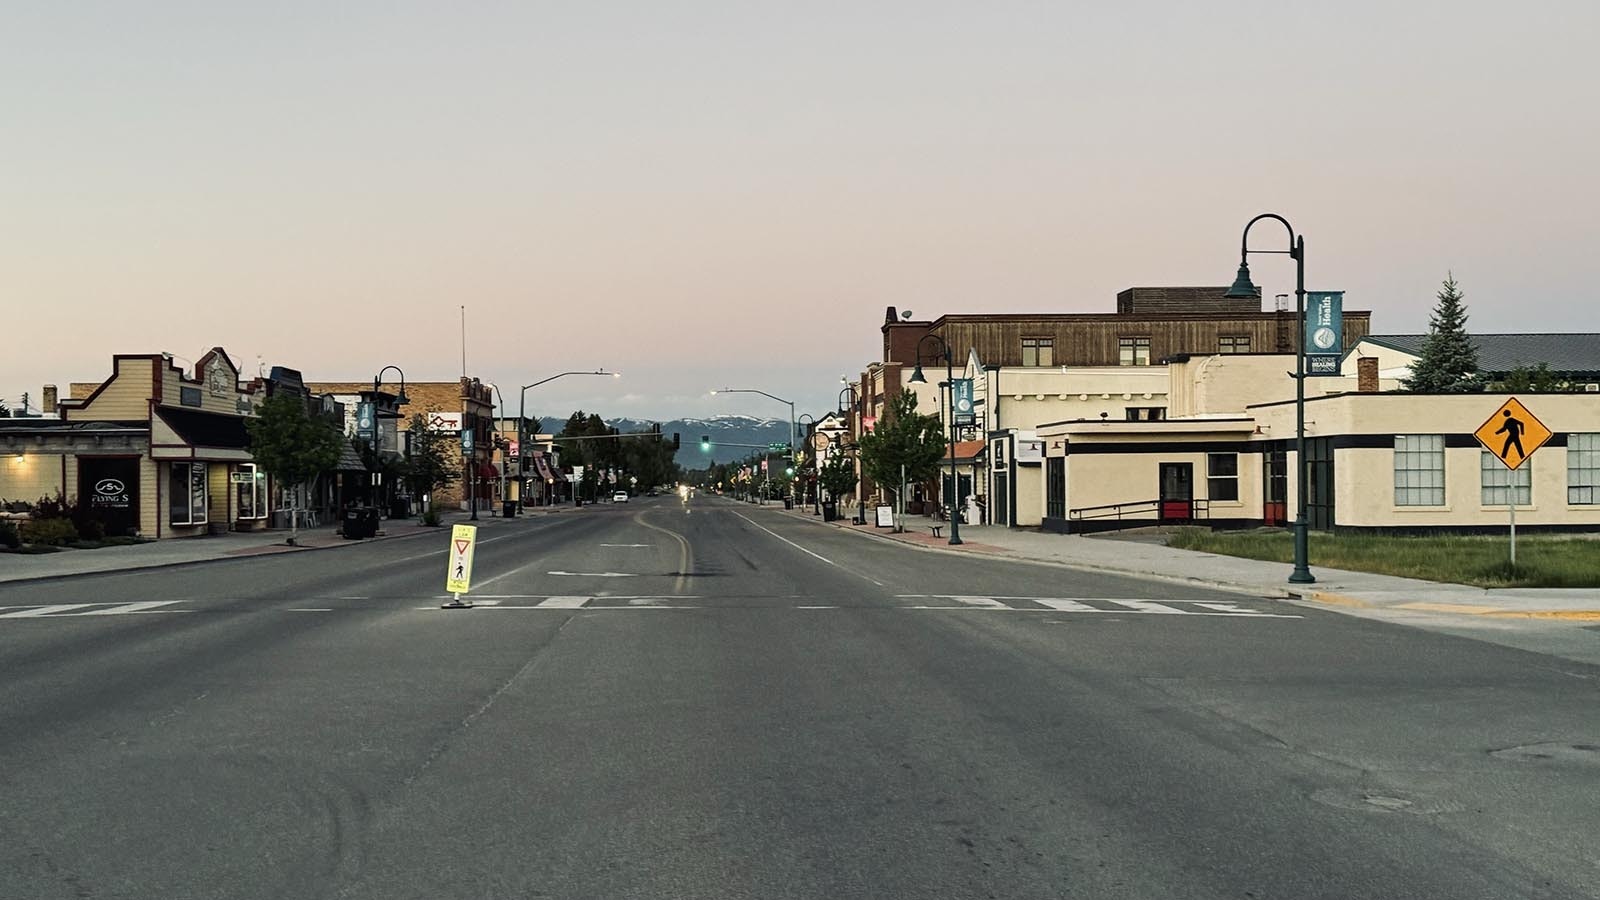 Just after 5 a.m. on Thursday, the town of Driggs, Idaho, was nearly a ghost town. It is normally packed with rush-hour traffic from Idaho’s Teton Valley headed over the Teton Pass to Jackson.